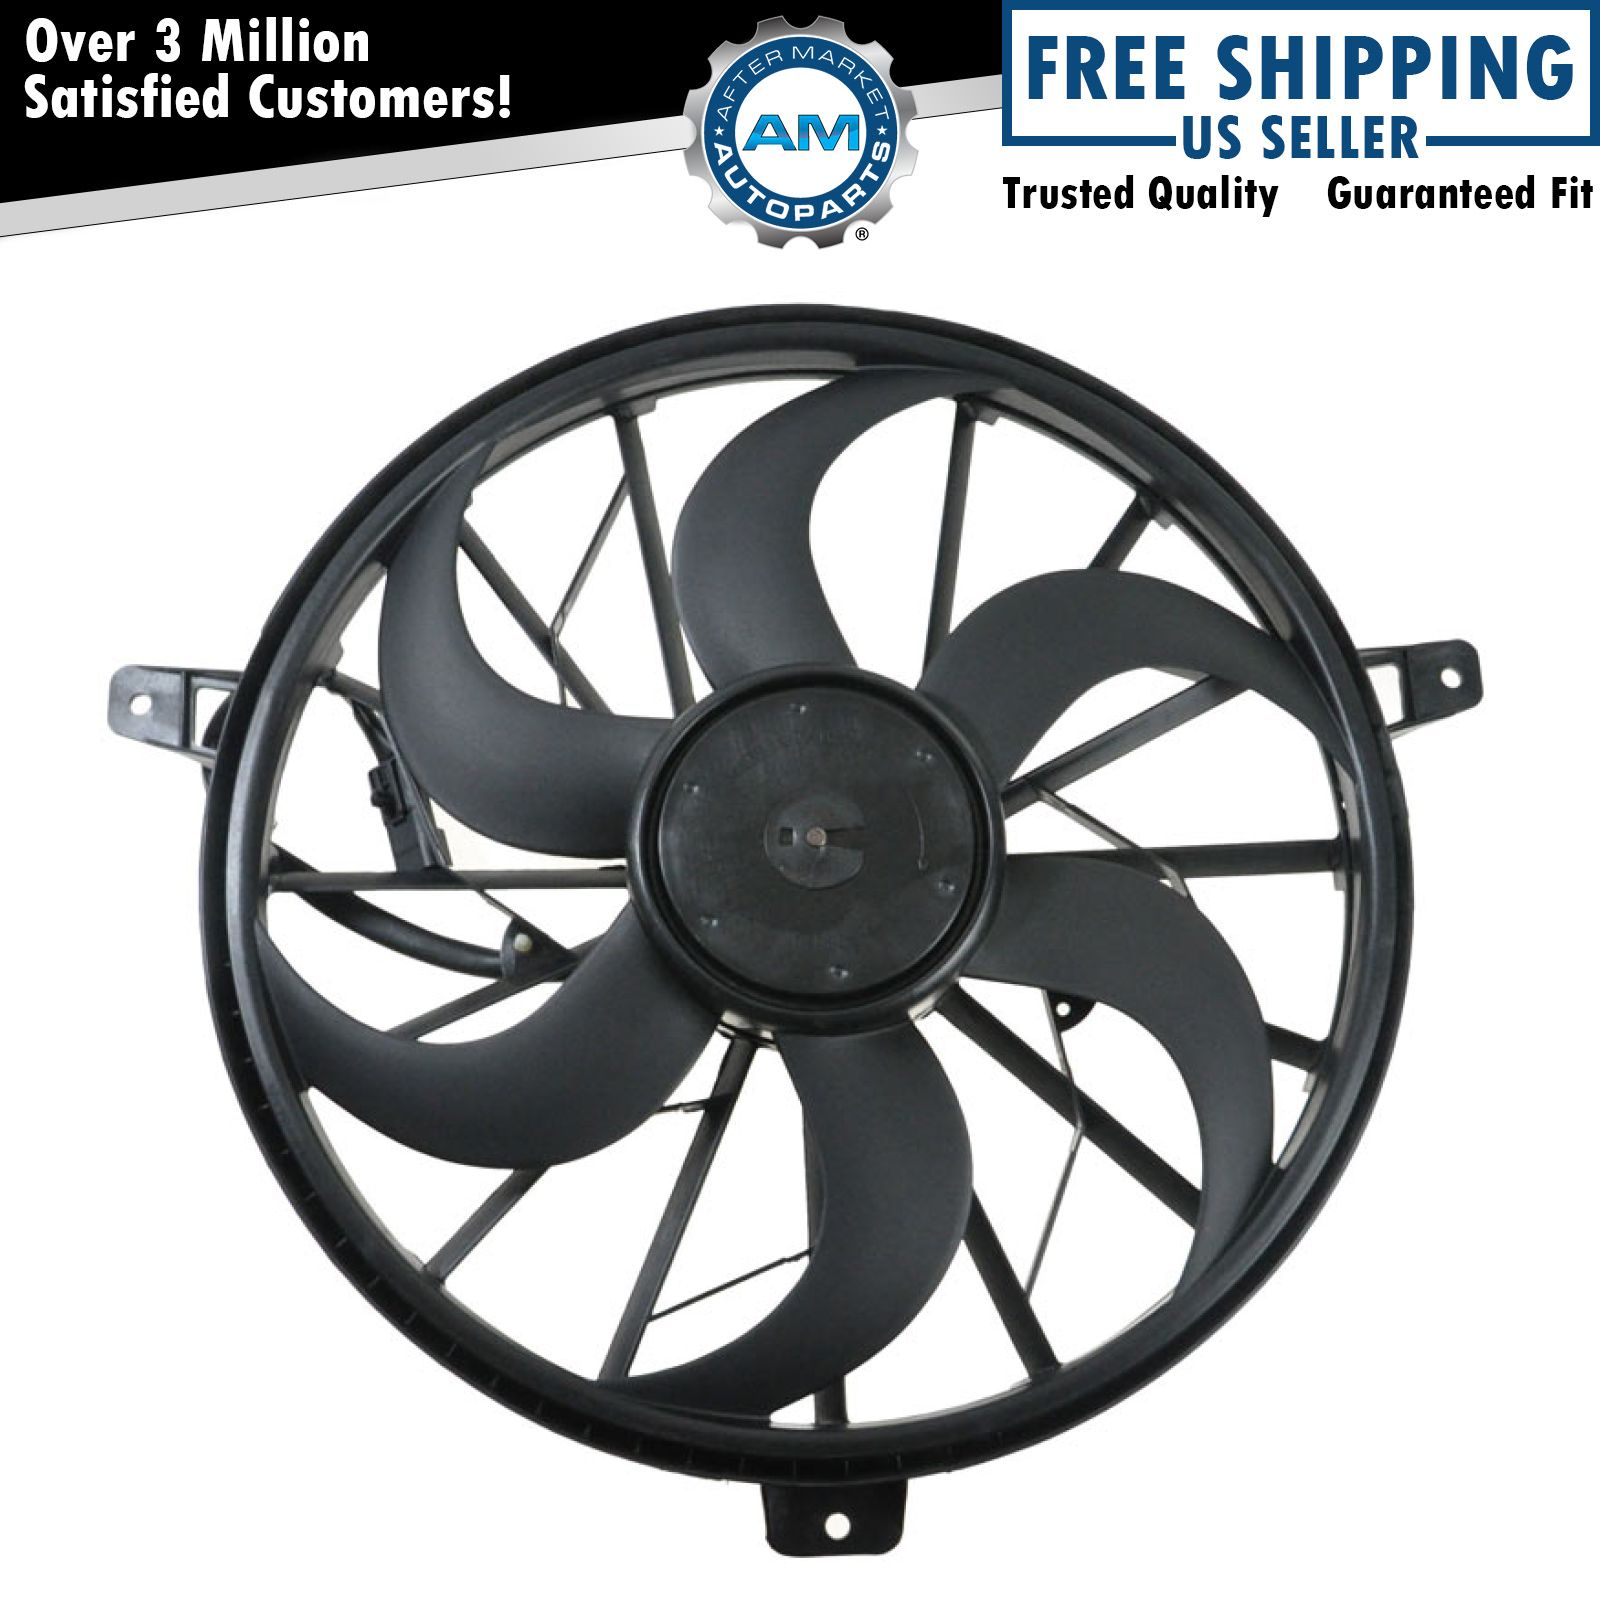 Radiator Cooling Fan 3 Pin Plug for 02-04 Jeep Grand Cherokee w/ Tow Package